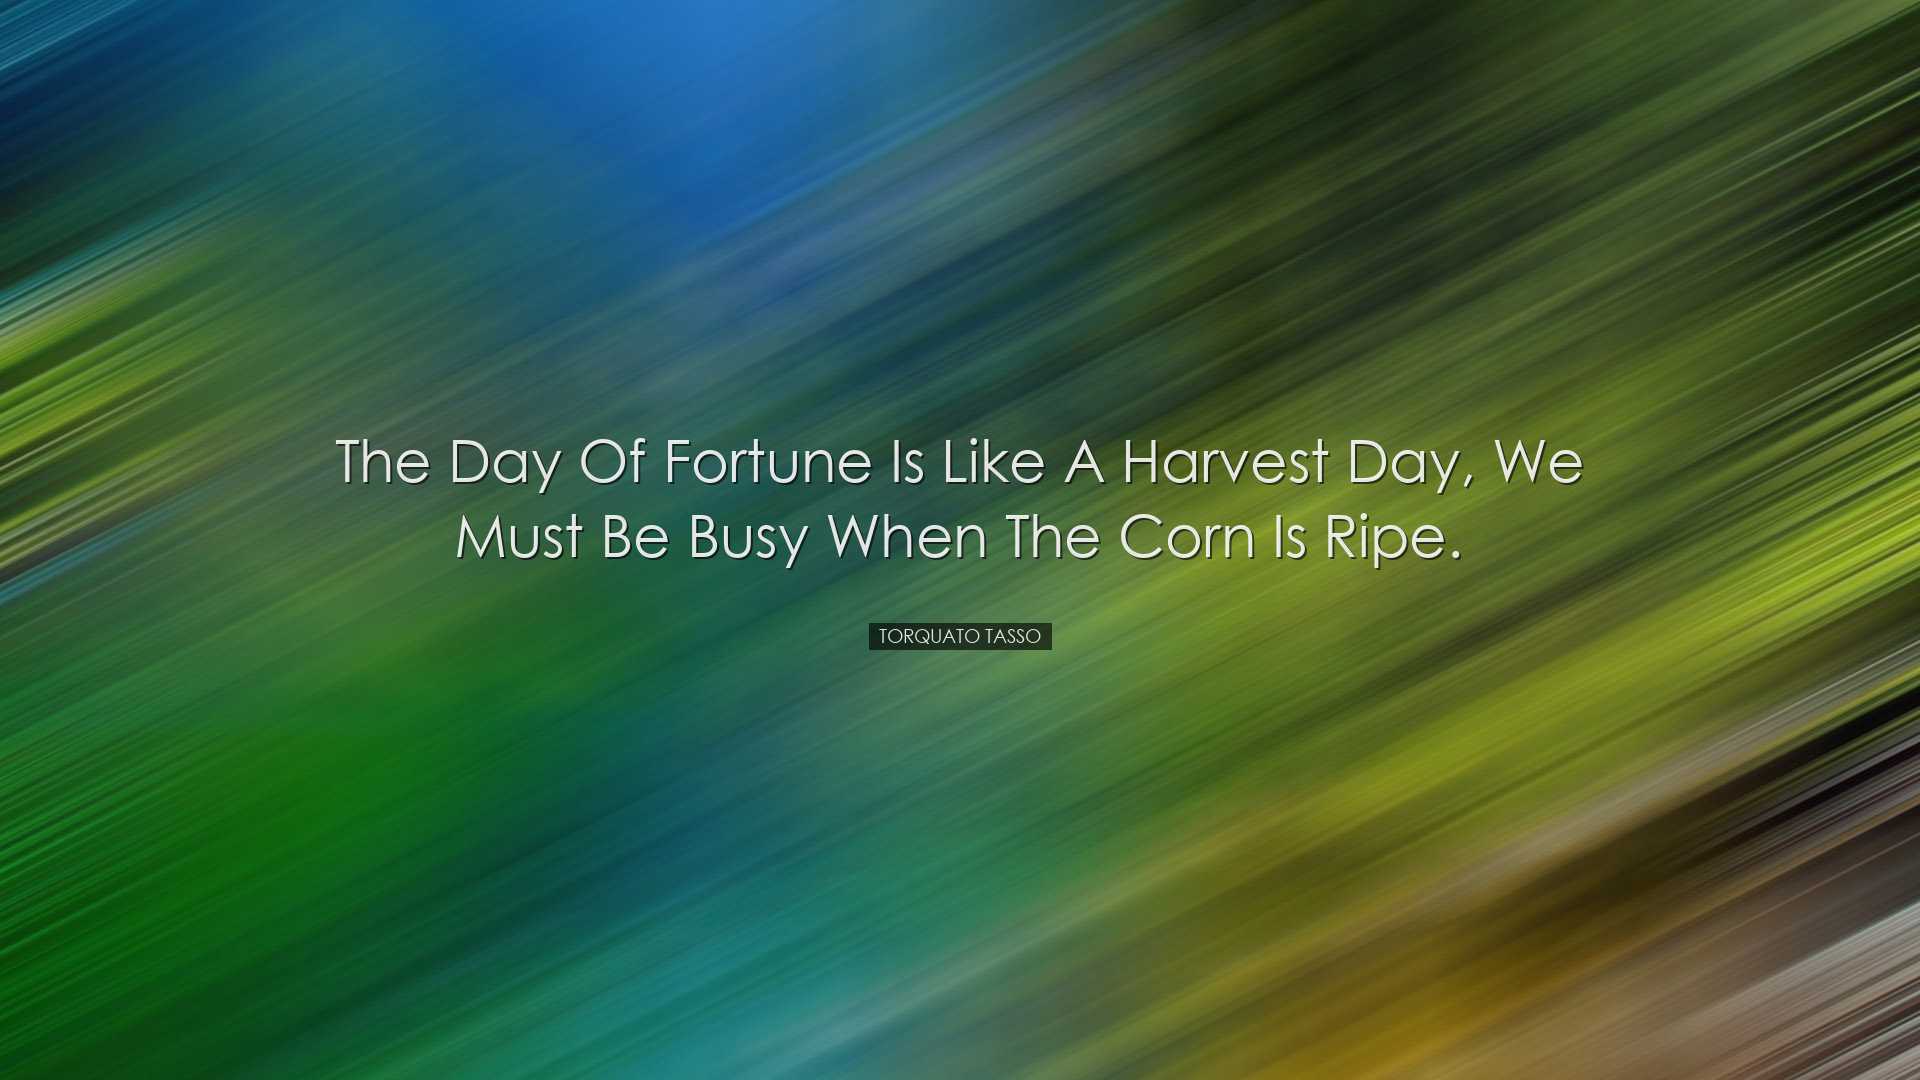 The day of fortune is like a harvest day, We must be busy when the